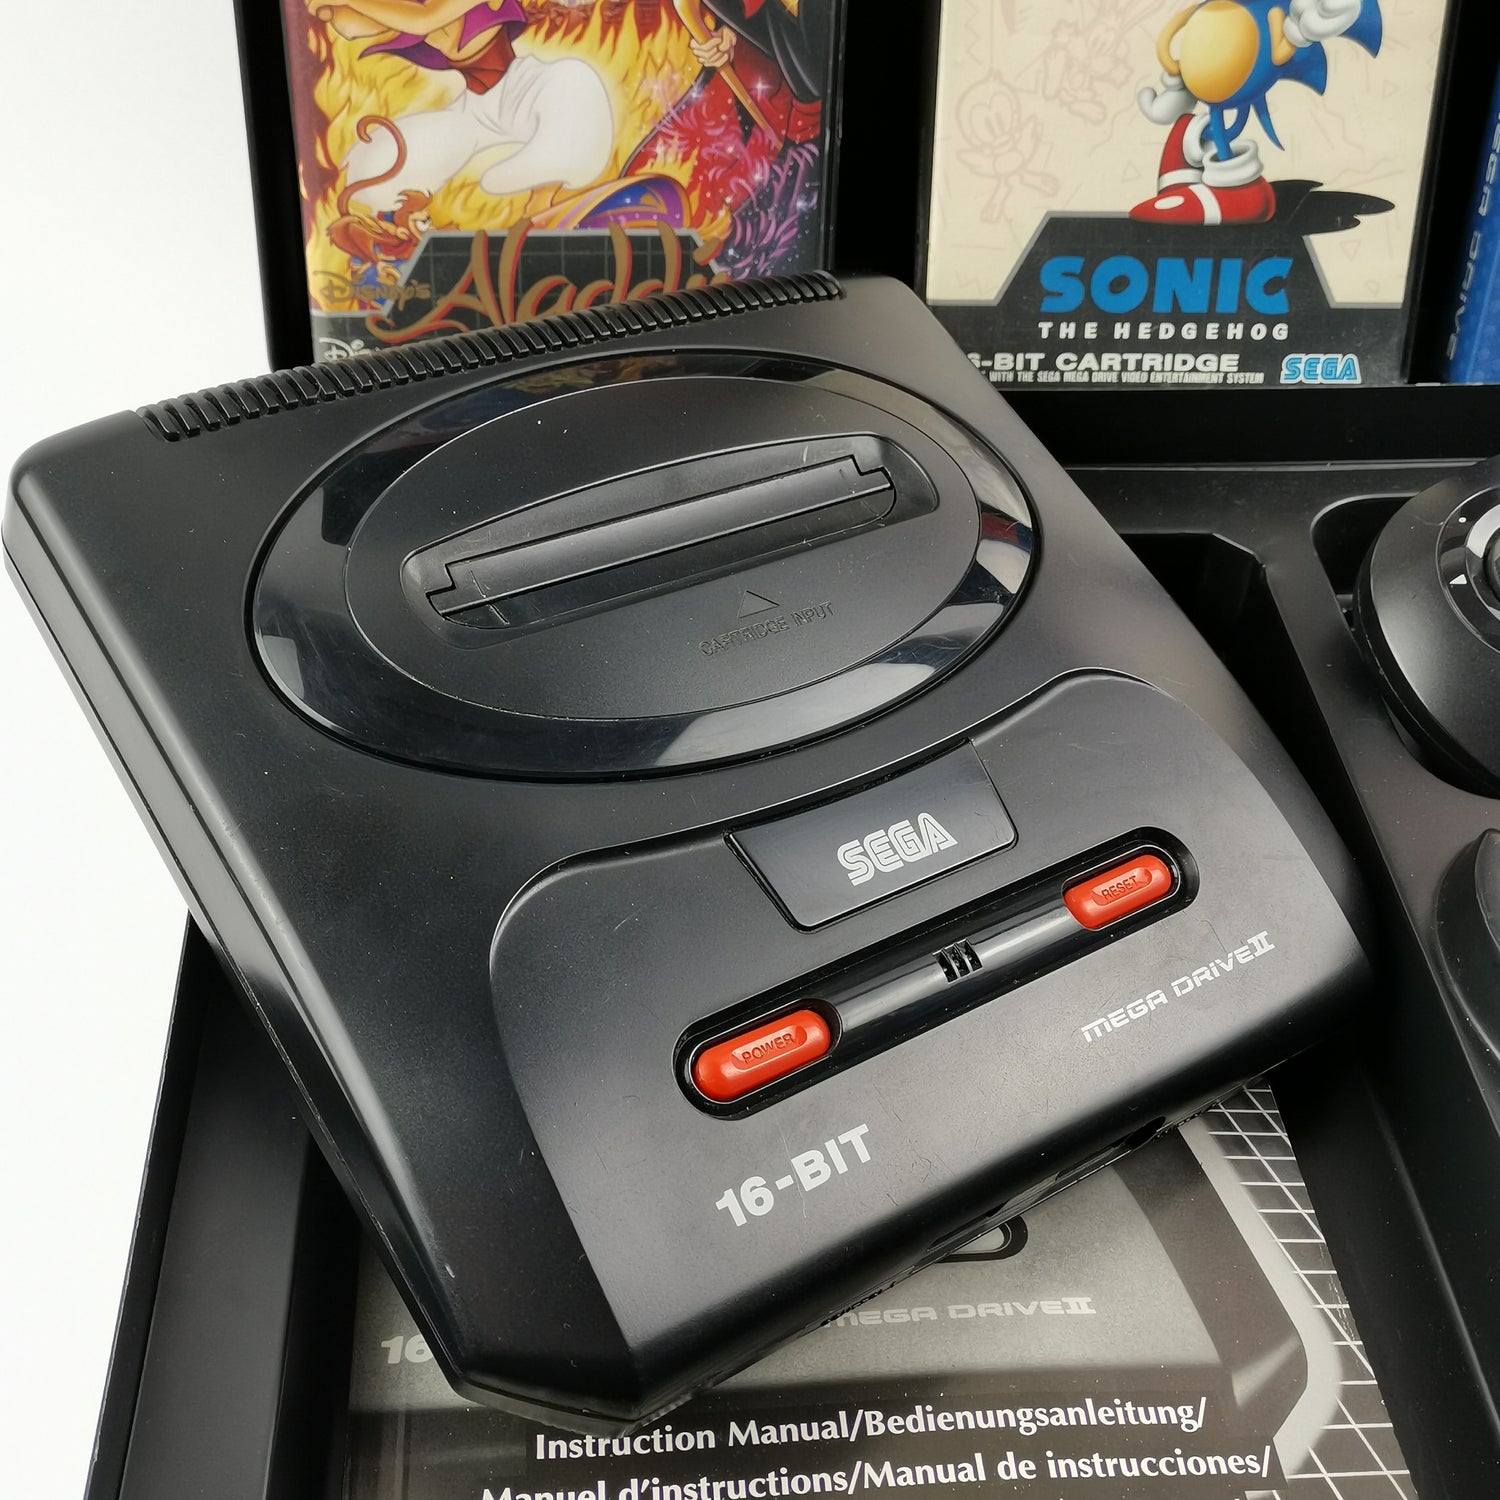 Sega Mega Drive II 2 with 2 controllers, power cable, 4 games and case